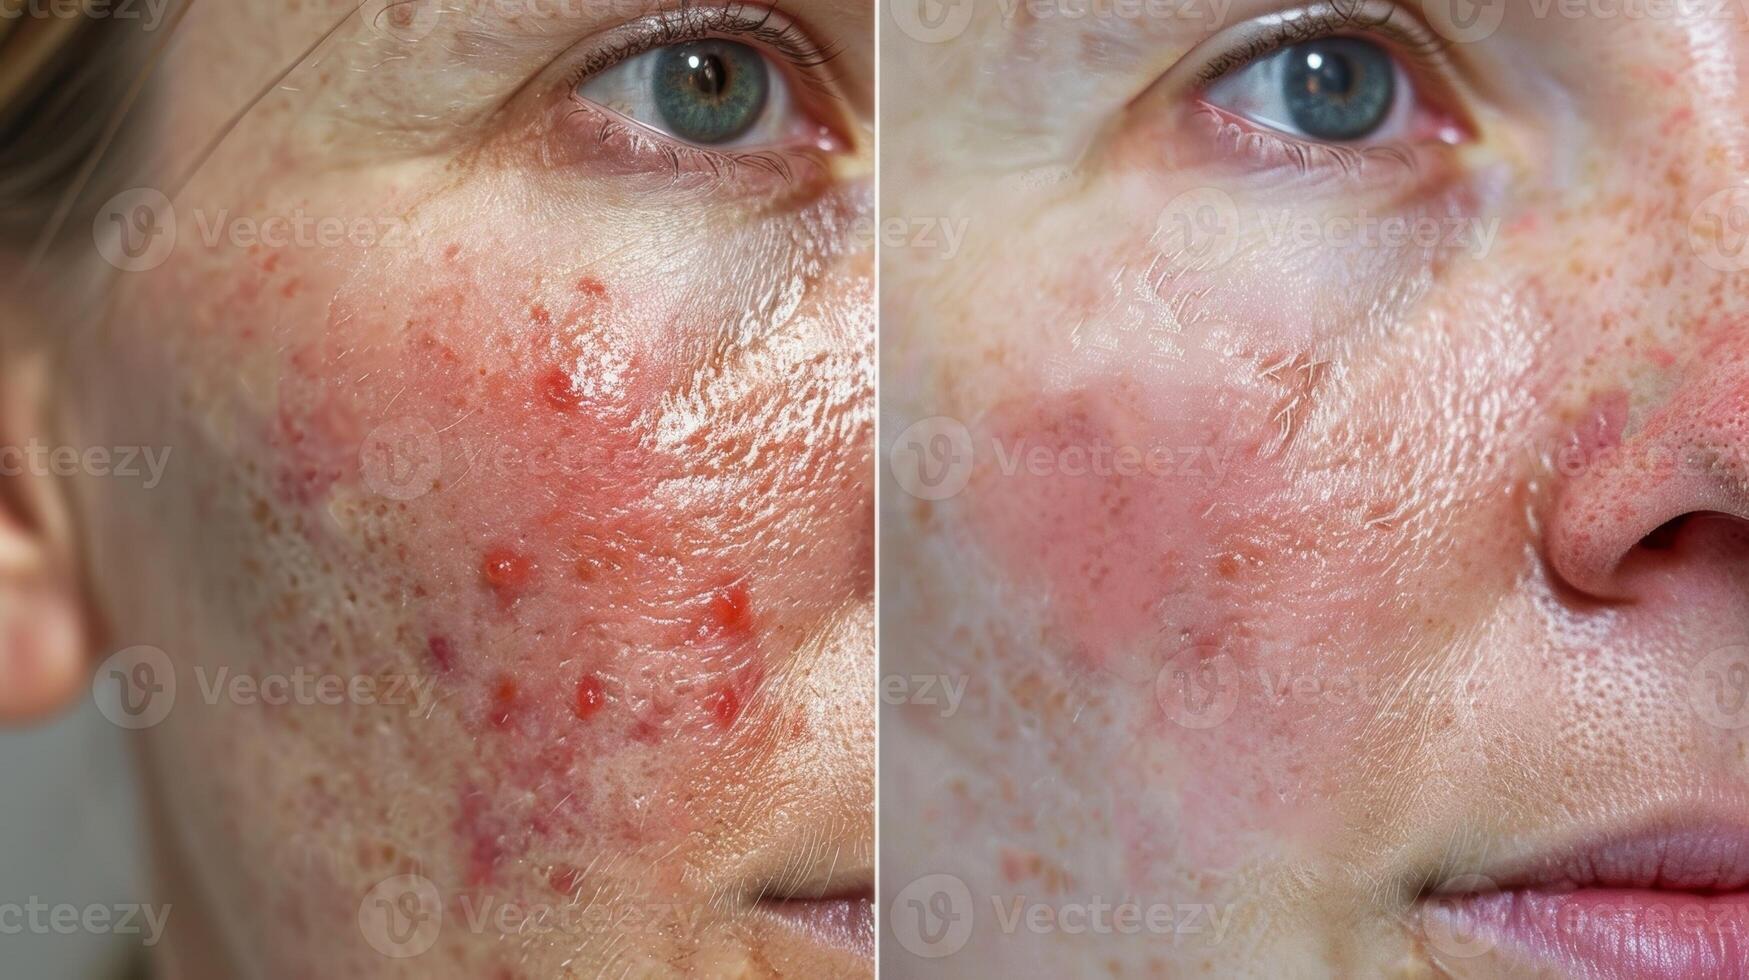 A before and after photo showing significant improvement in a psoriasis sufferers skin after using infrared therapy.